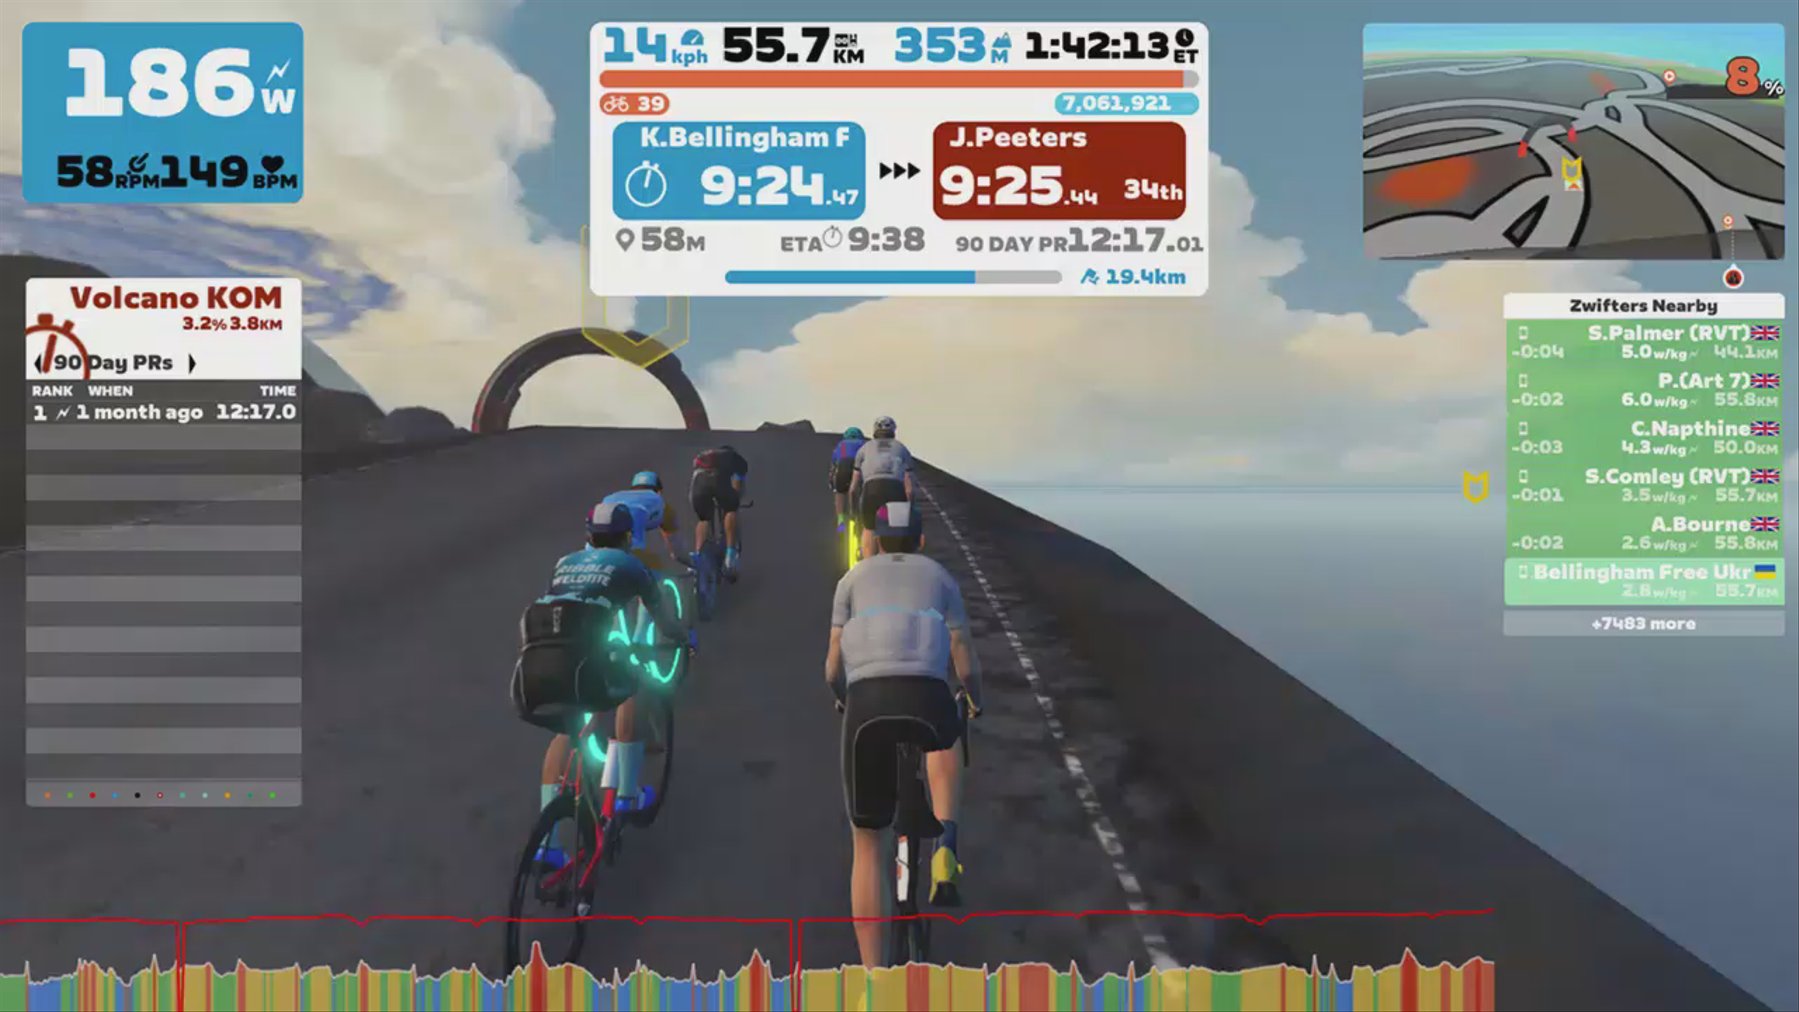 Zwift - Steve Comley (RVT)'s Meetup on Spiral into the Volcano in Watopia